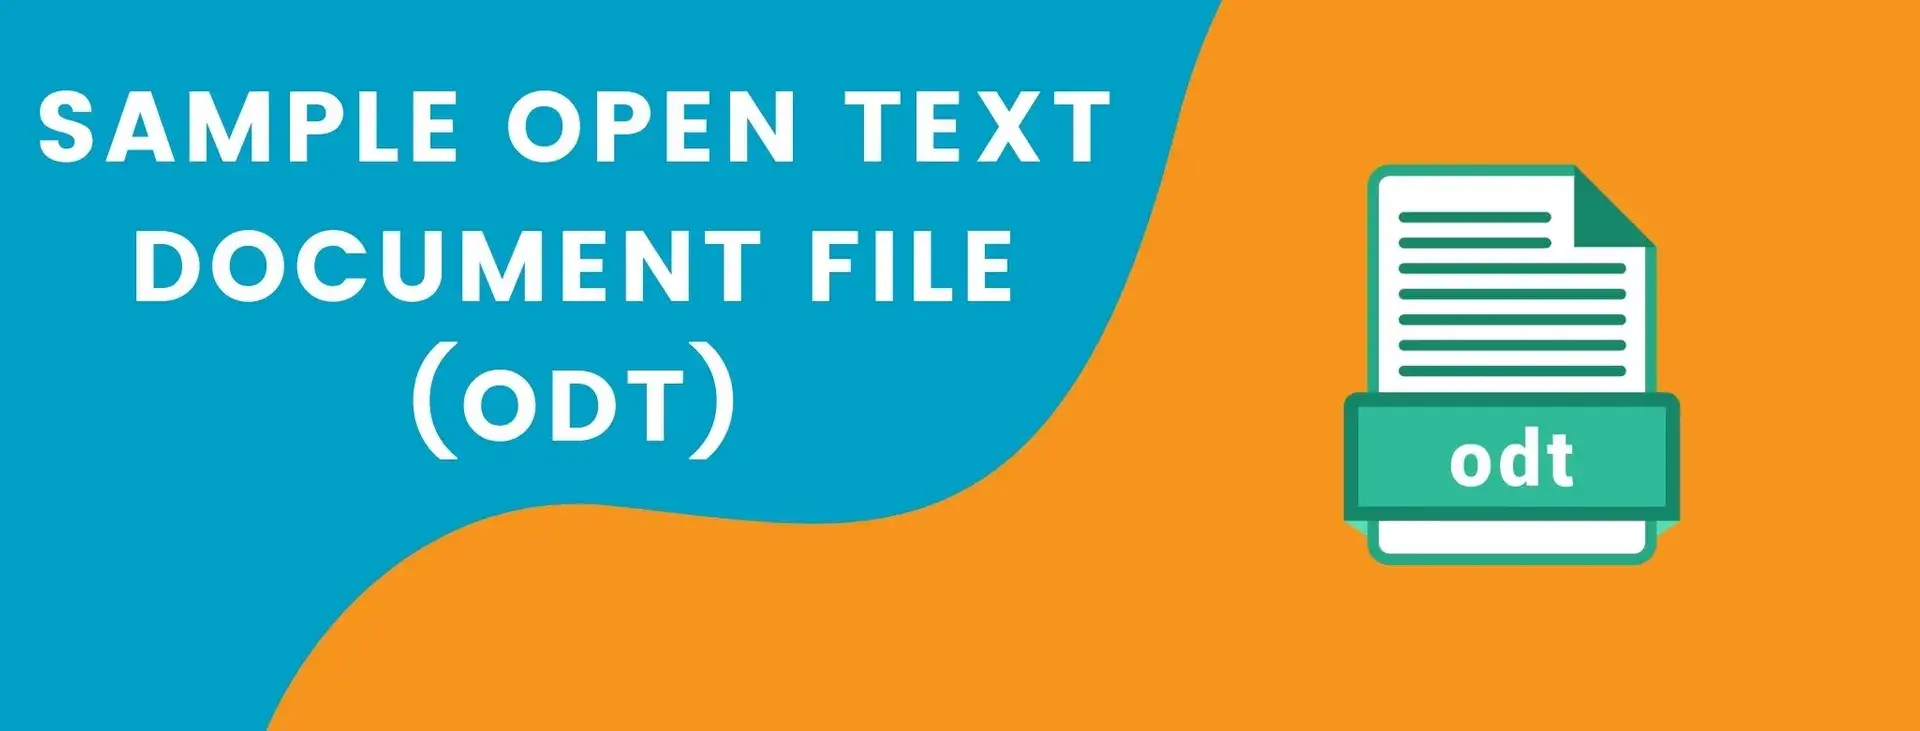 Sample Open Text Document Files